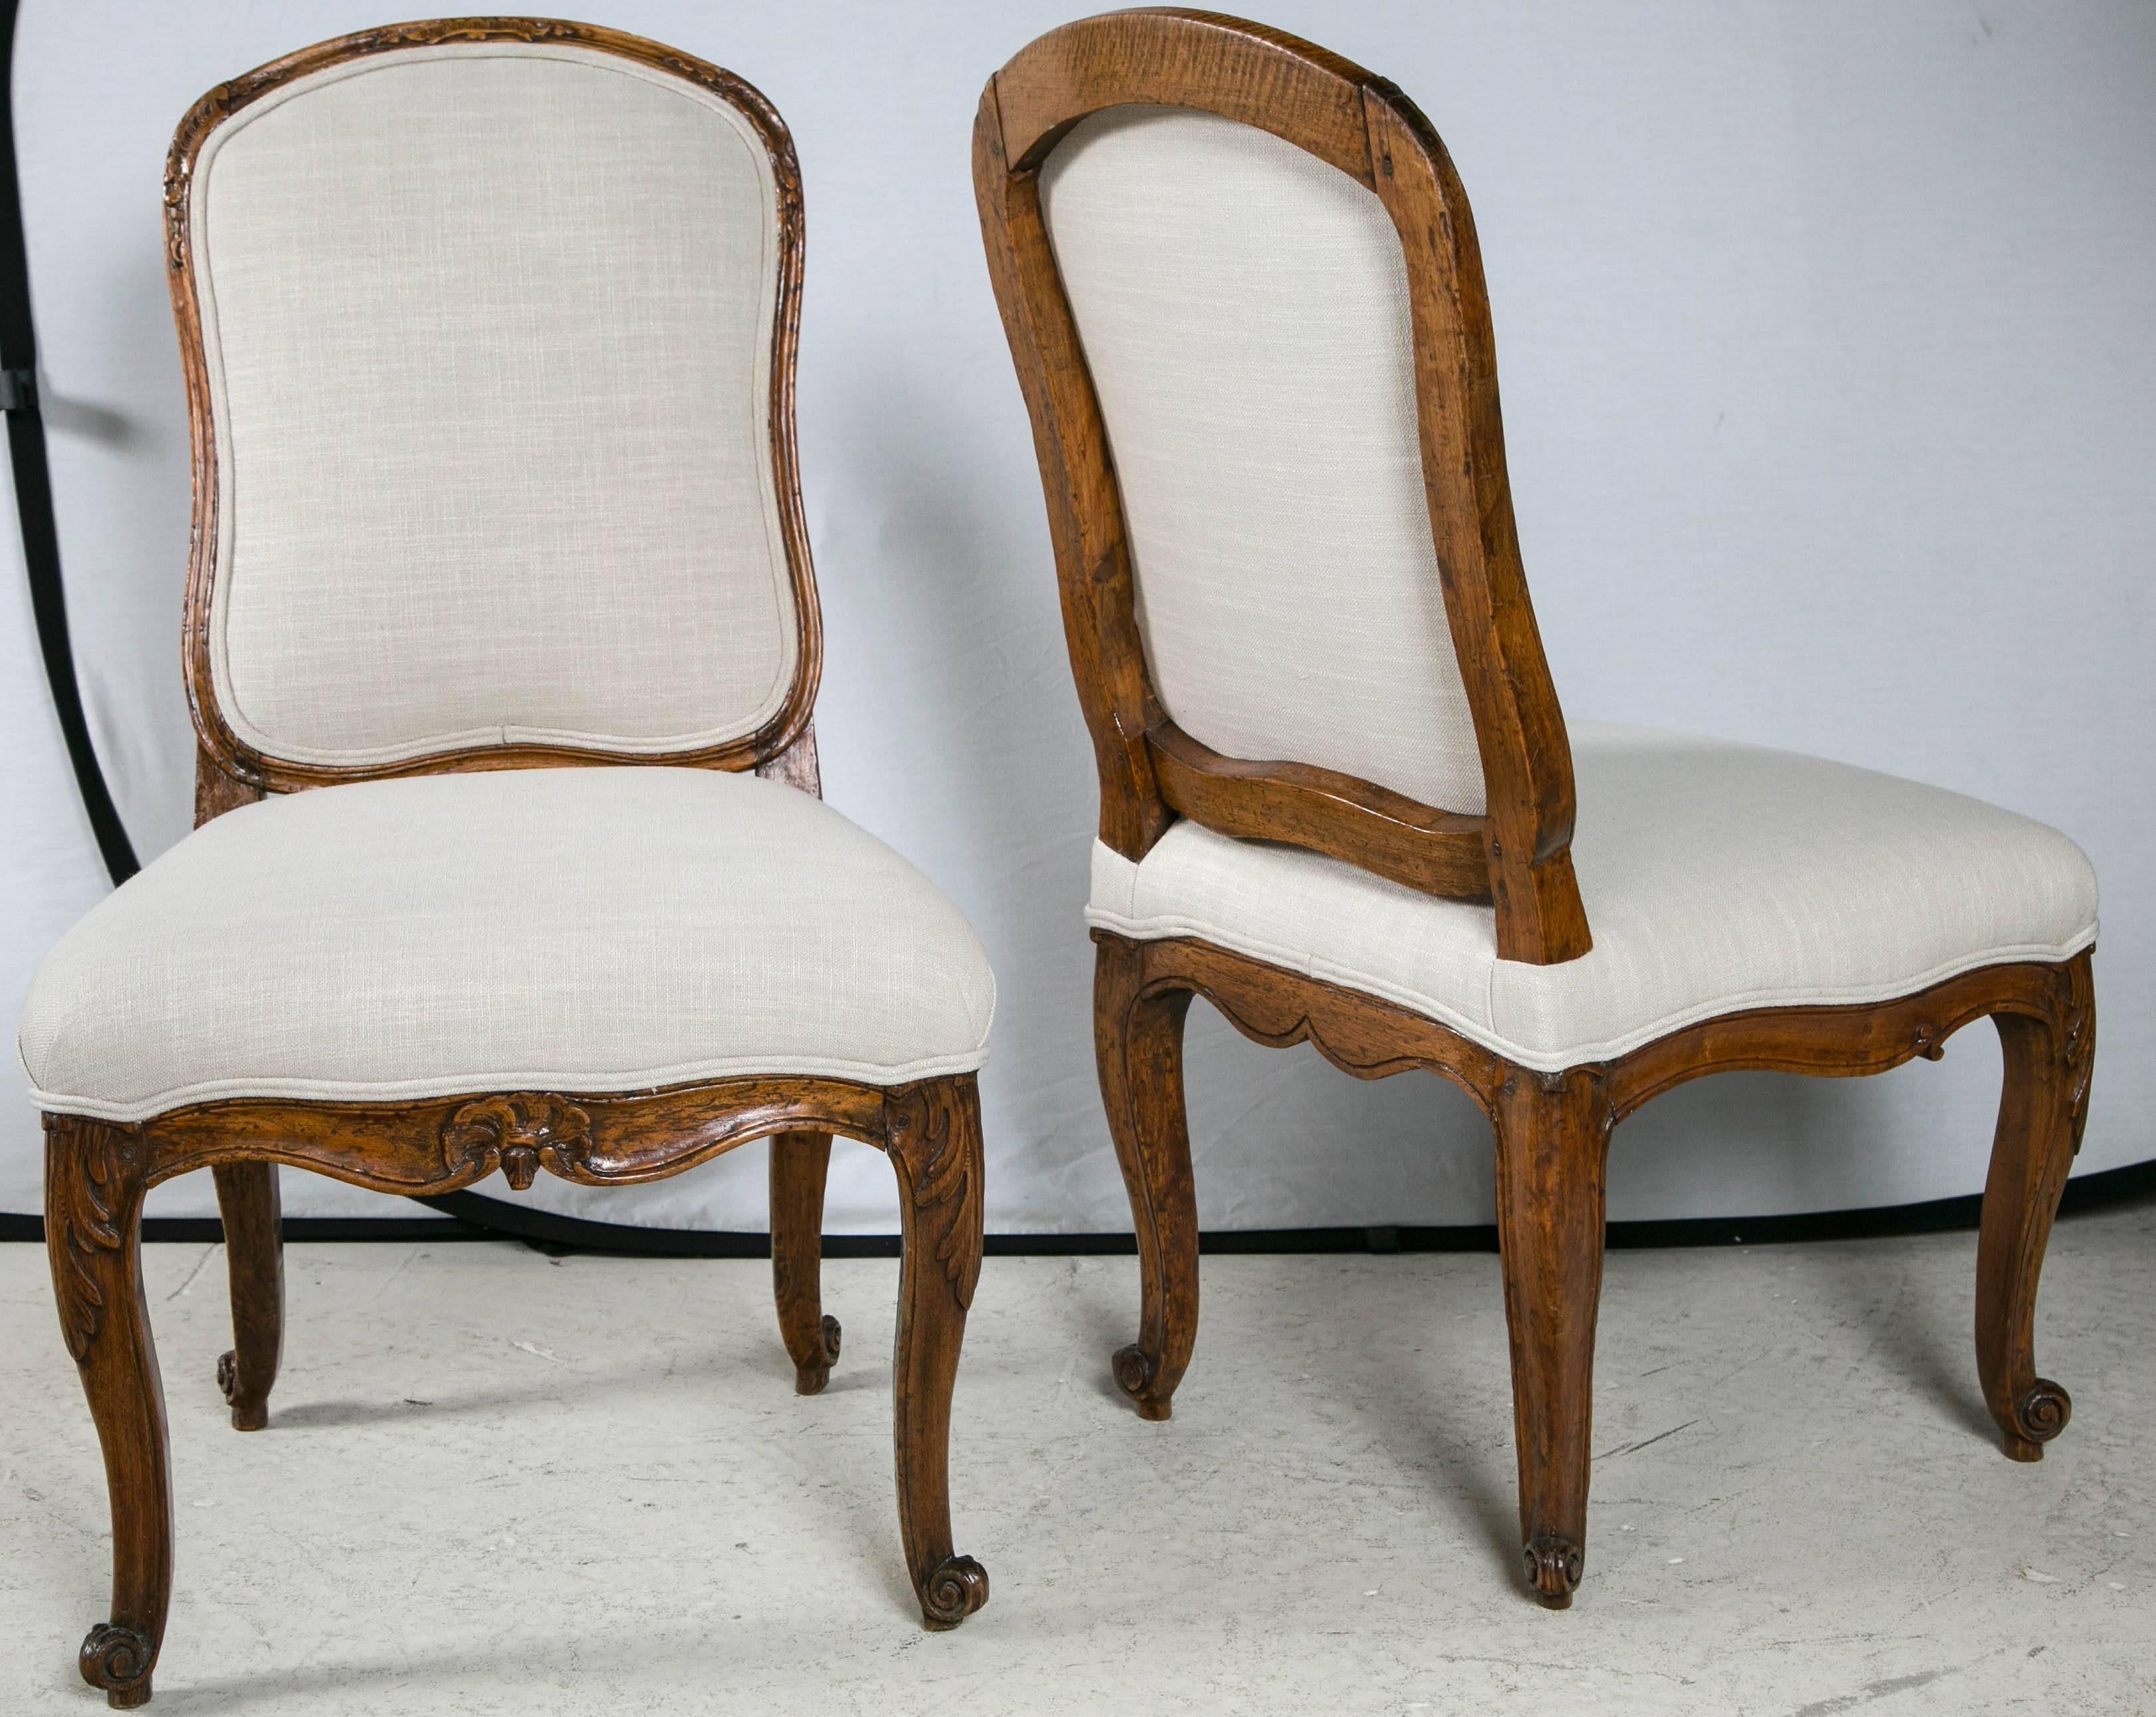 Pair of 18th century French walnut chairs upholstered in linen.